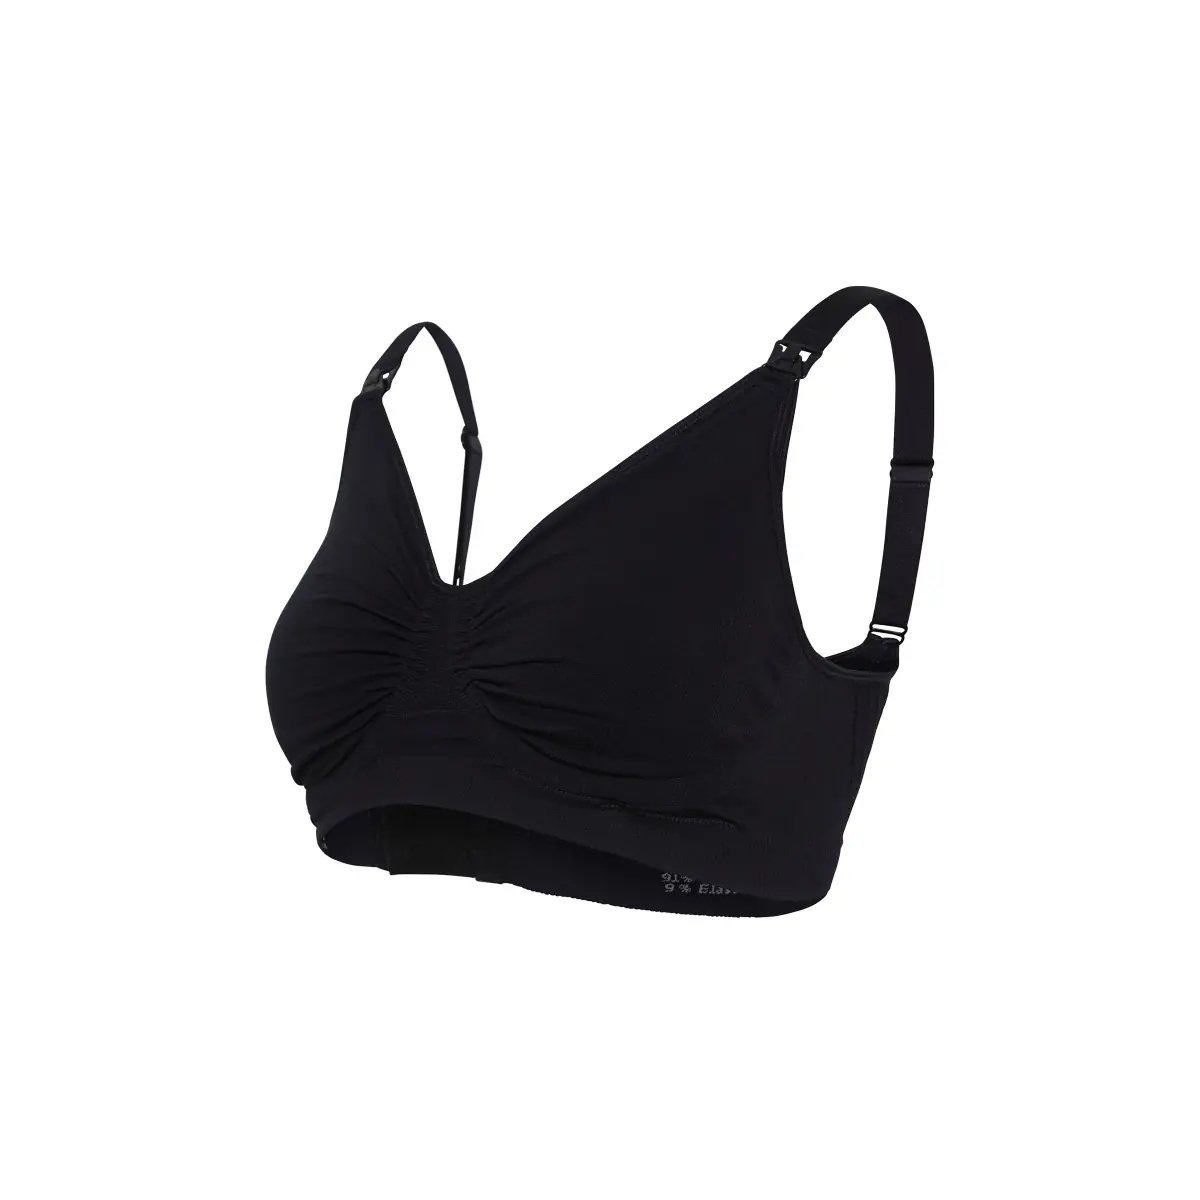 Image of Carriwell Maternity & Nursing Bra with Padded Carri-Gel Support - Black (Size - XX-LARGE)